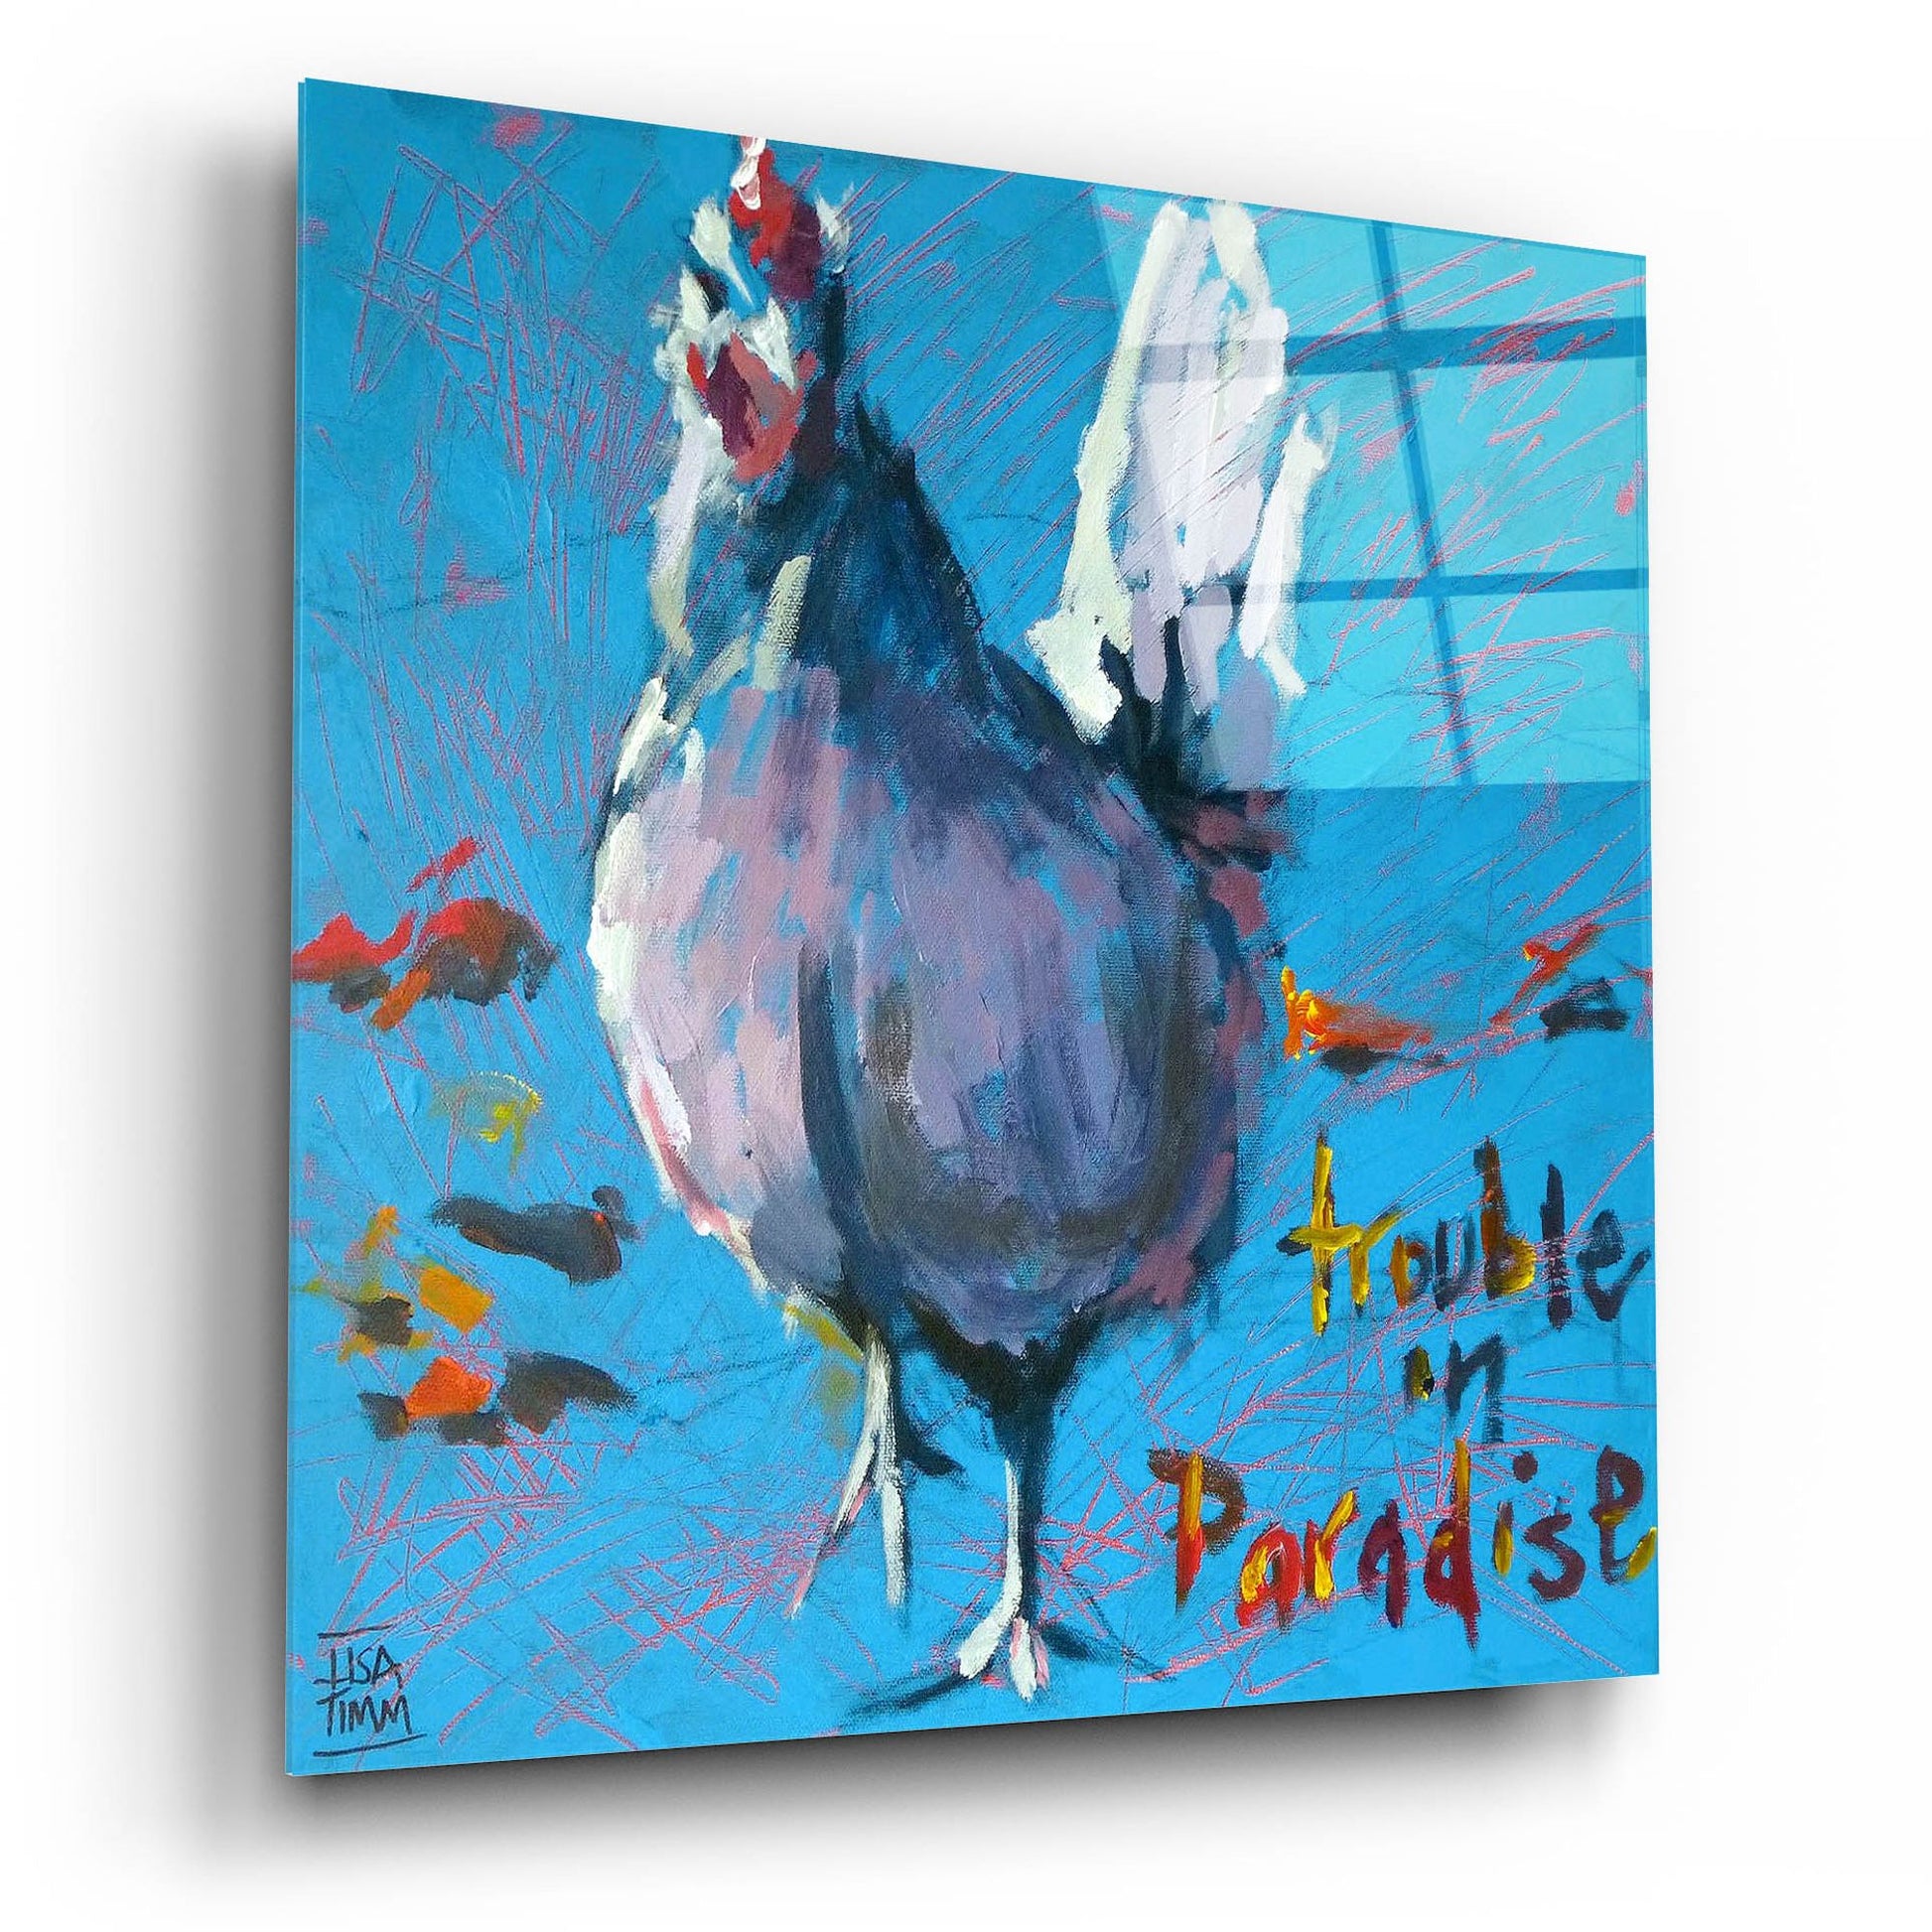 Epic Art 'Trouble In Paradise' by Lisa Timmerman, Acrylic Glass Wall Art,12x12